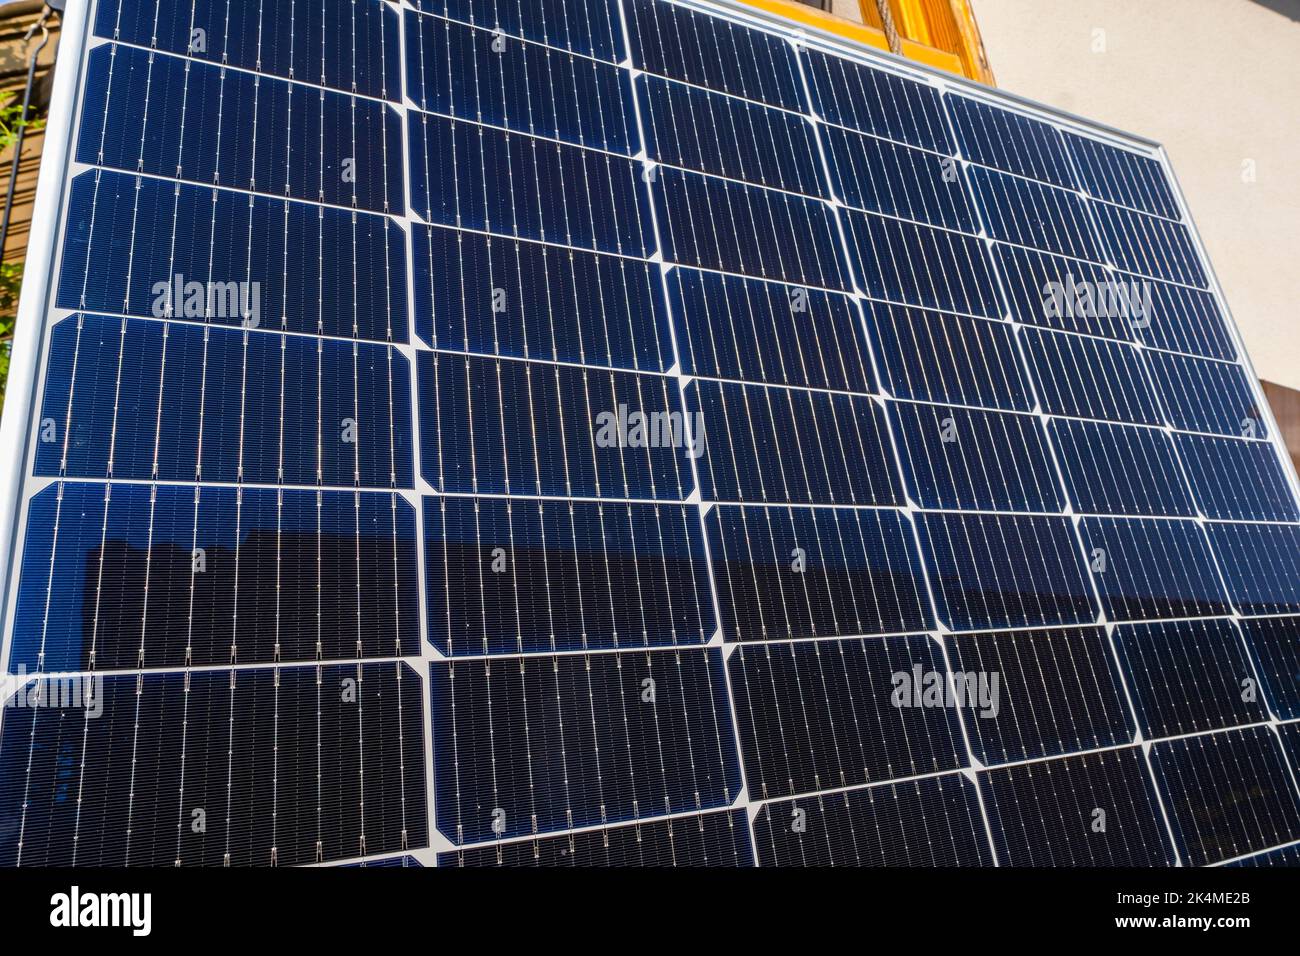 Solar panel surface. Navarre, Spain, Europe. Environment and technology concepts. Stock Photo